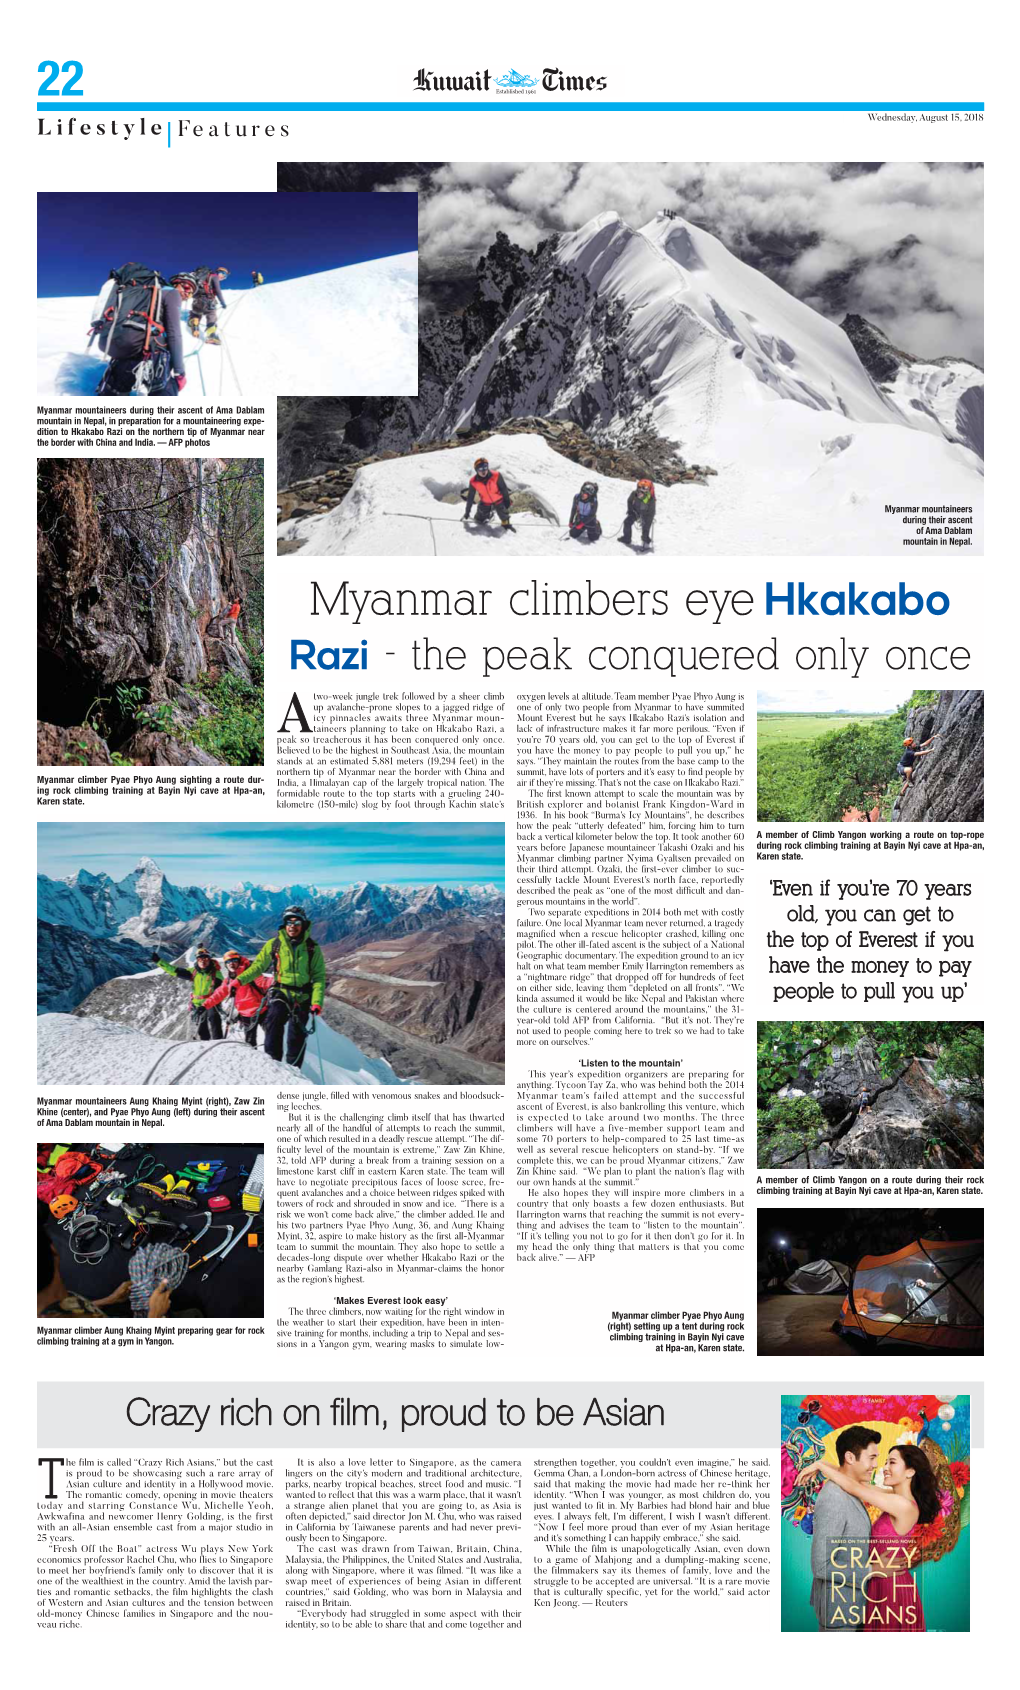 Hkakabo Razi on the Northern Tip of Myanmar Near the Border with China and India